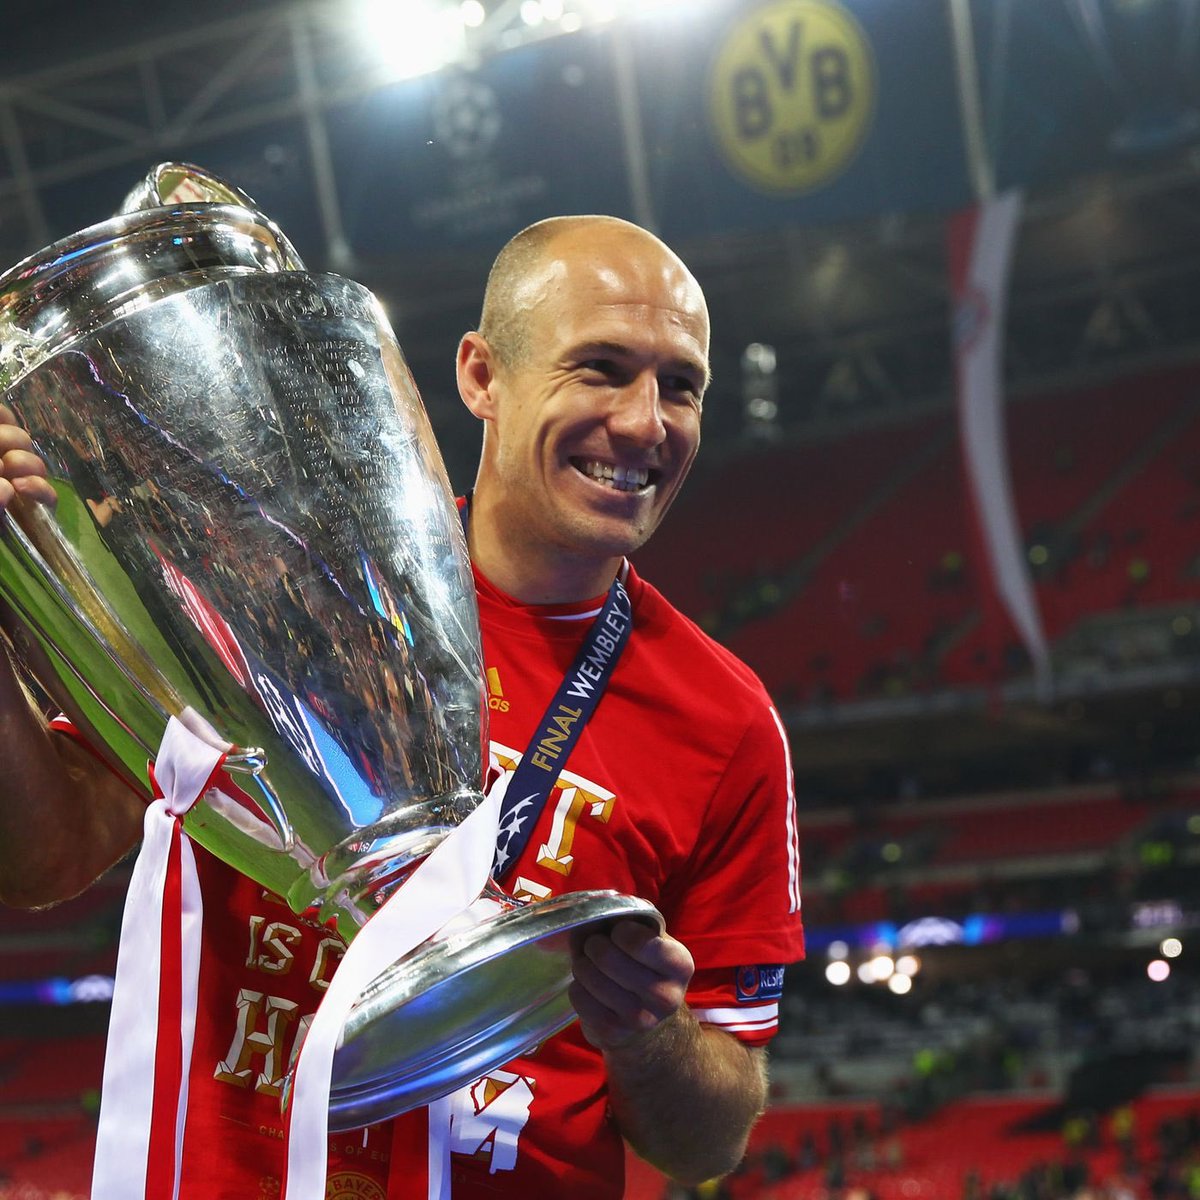 Robben was more of a finisher. Fifa WC 2014 Bronze ball winner, fourth on the Ballon d’Or shortlist in 2014, included into Fifa’s TOTY in 2014 (none of Liverpool’s front 3 were included even once).